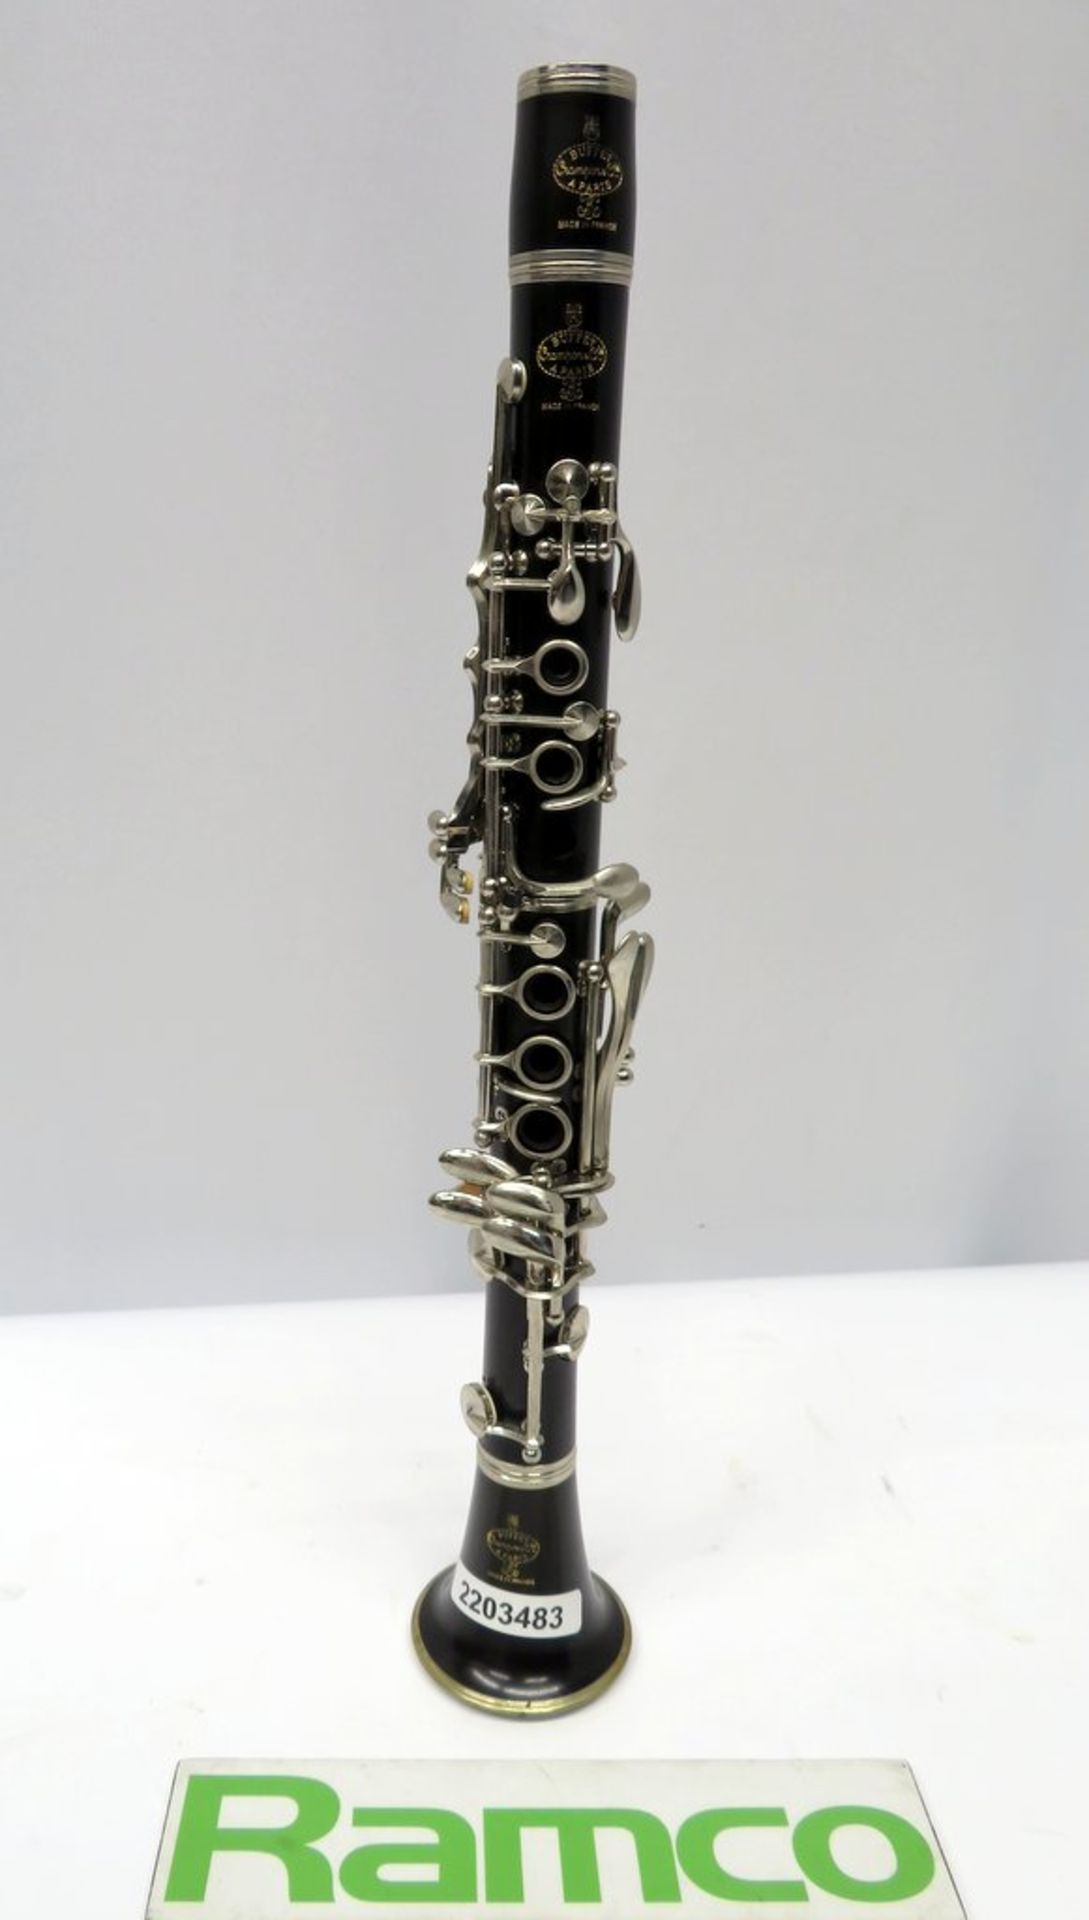 Buffet Crampon E Flat Clarinet Complete With Case. - Image 7 of 17